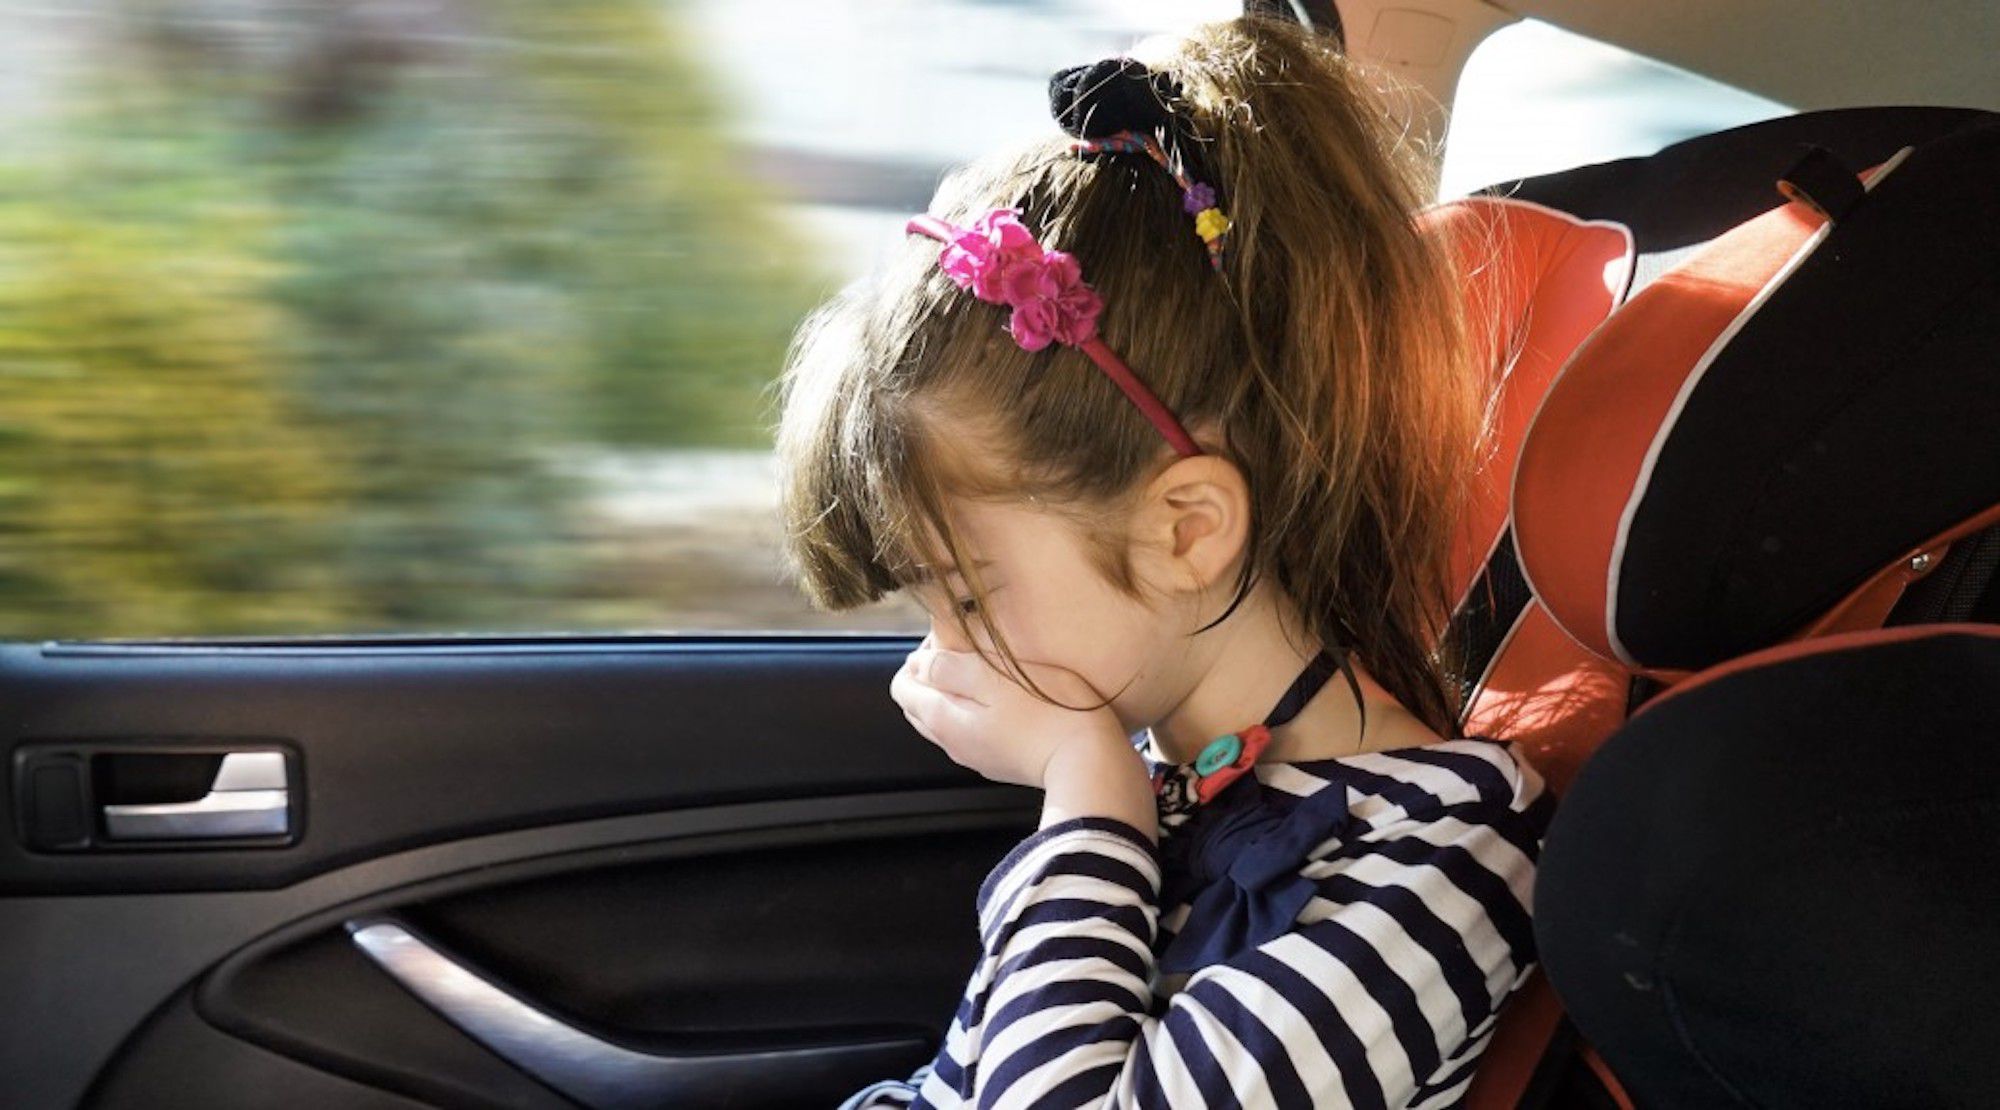 How to avoid car sickness